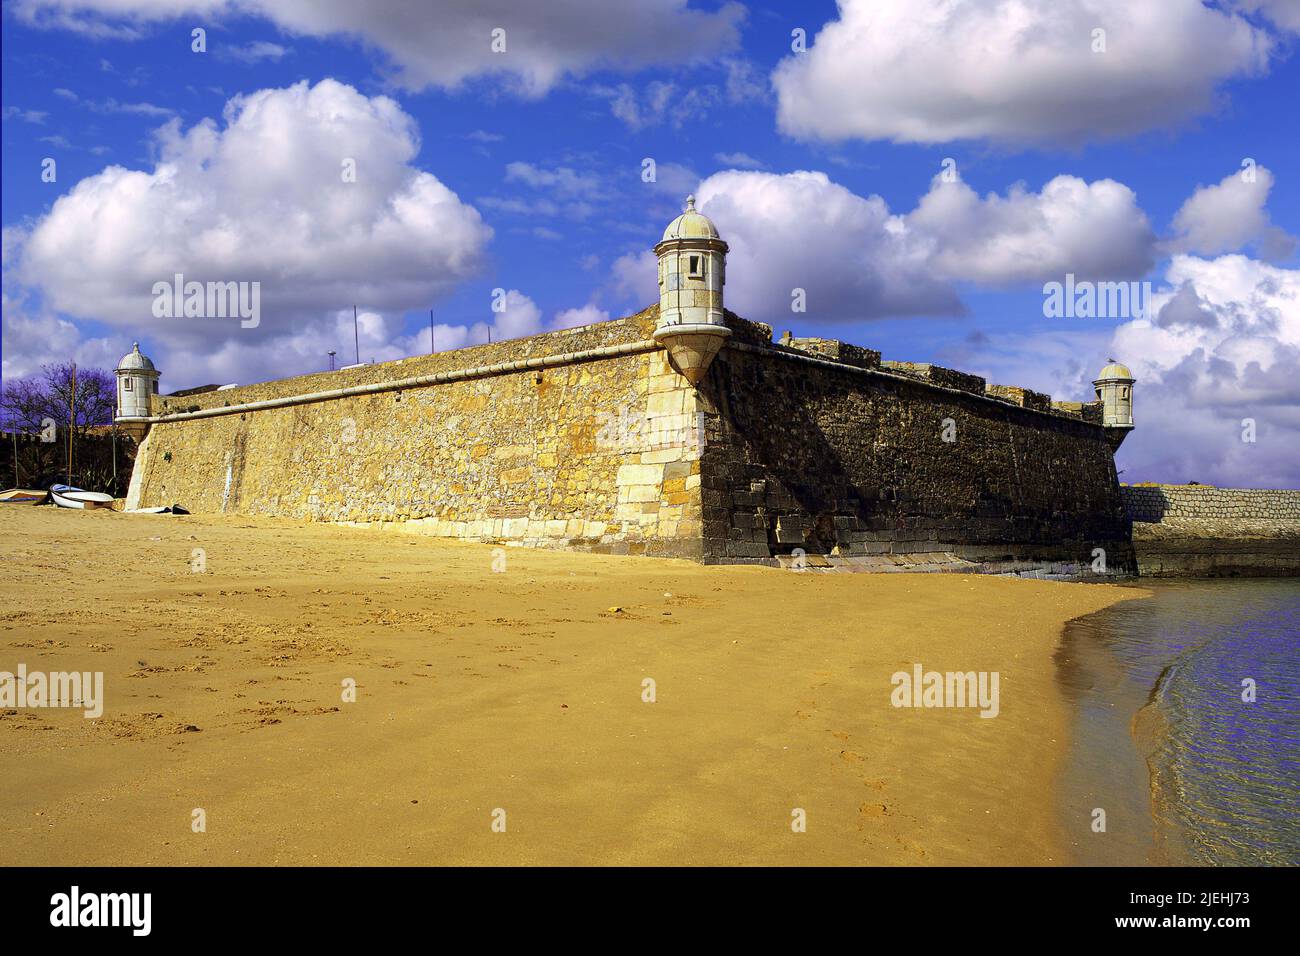 Golden sand on the beach at Lagos, with the old harbour defenses, the 17th century Forte Bandeira, under a deep blue sky, Algarve, Portugal Stock Photo